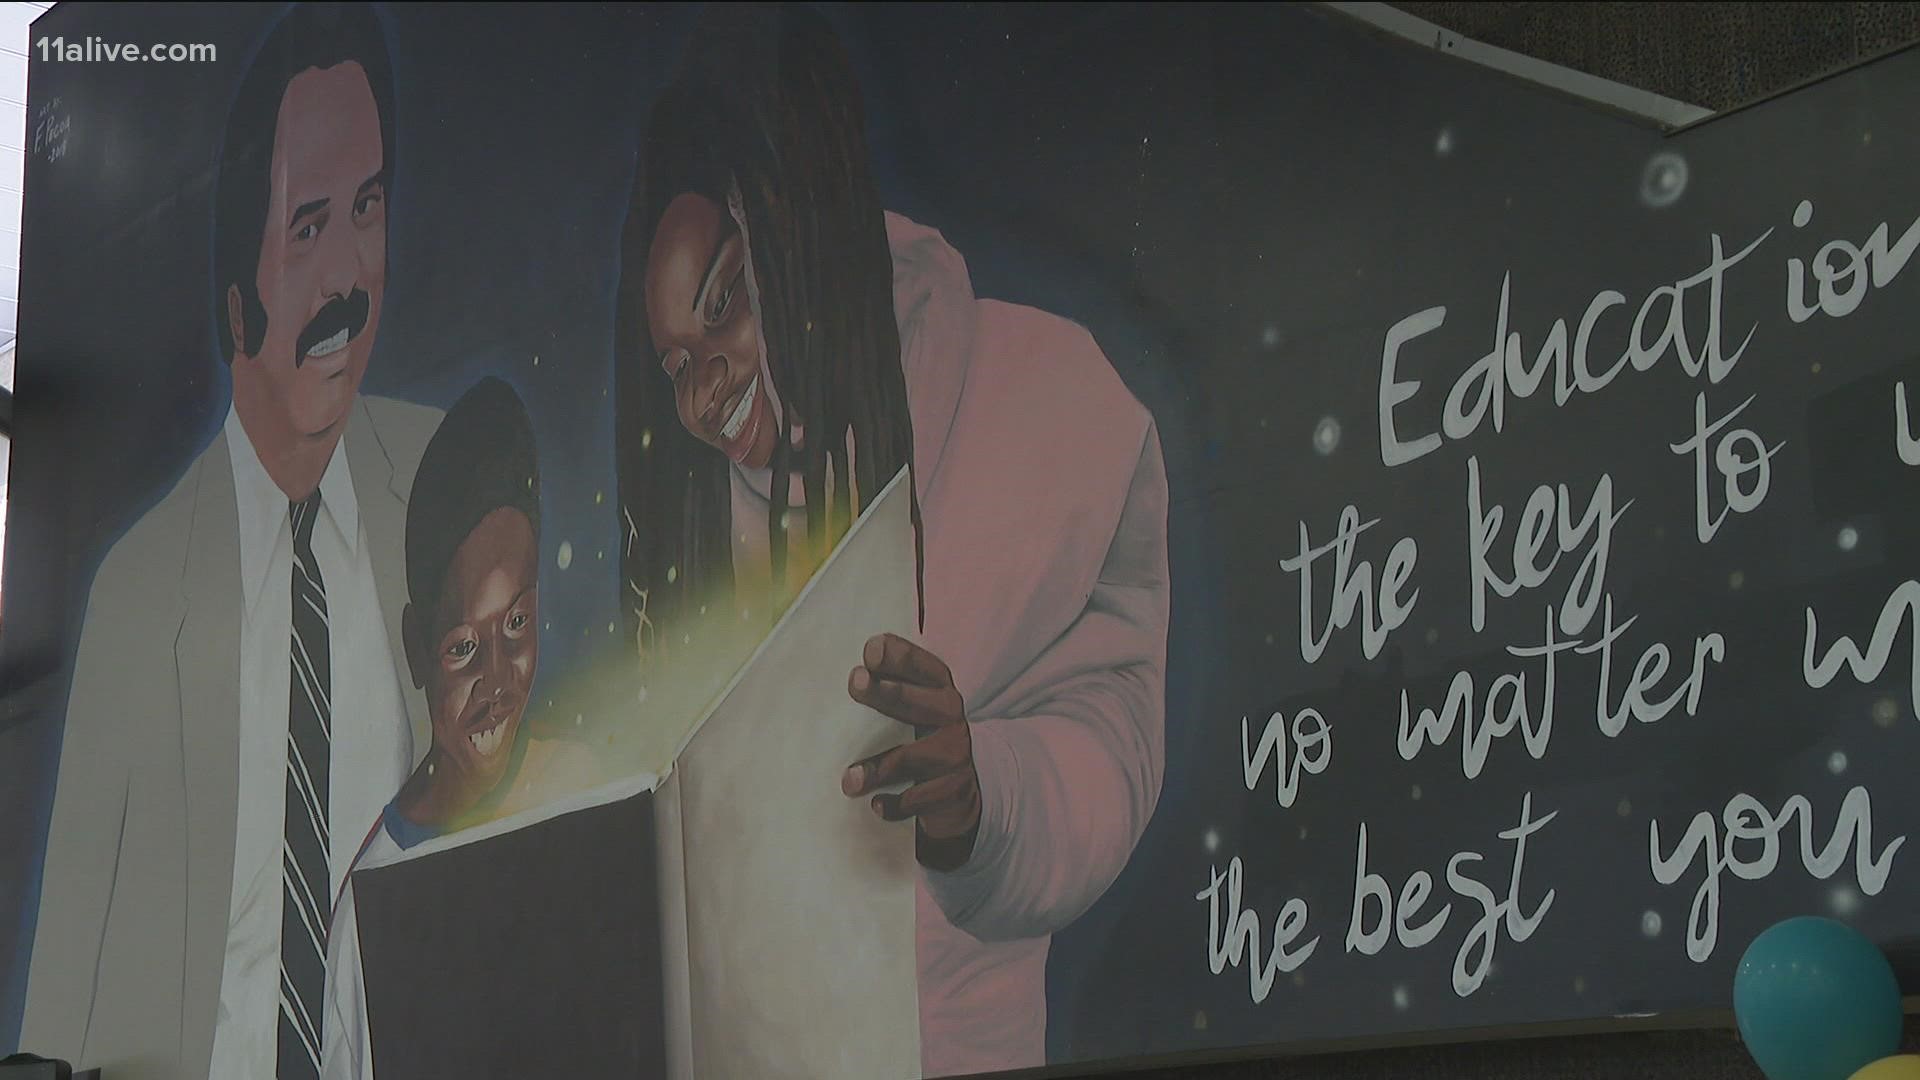 The mural celebrates the life of Dr. Holmes and his accomplishments.